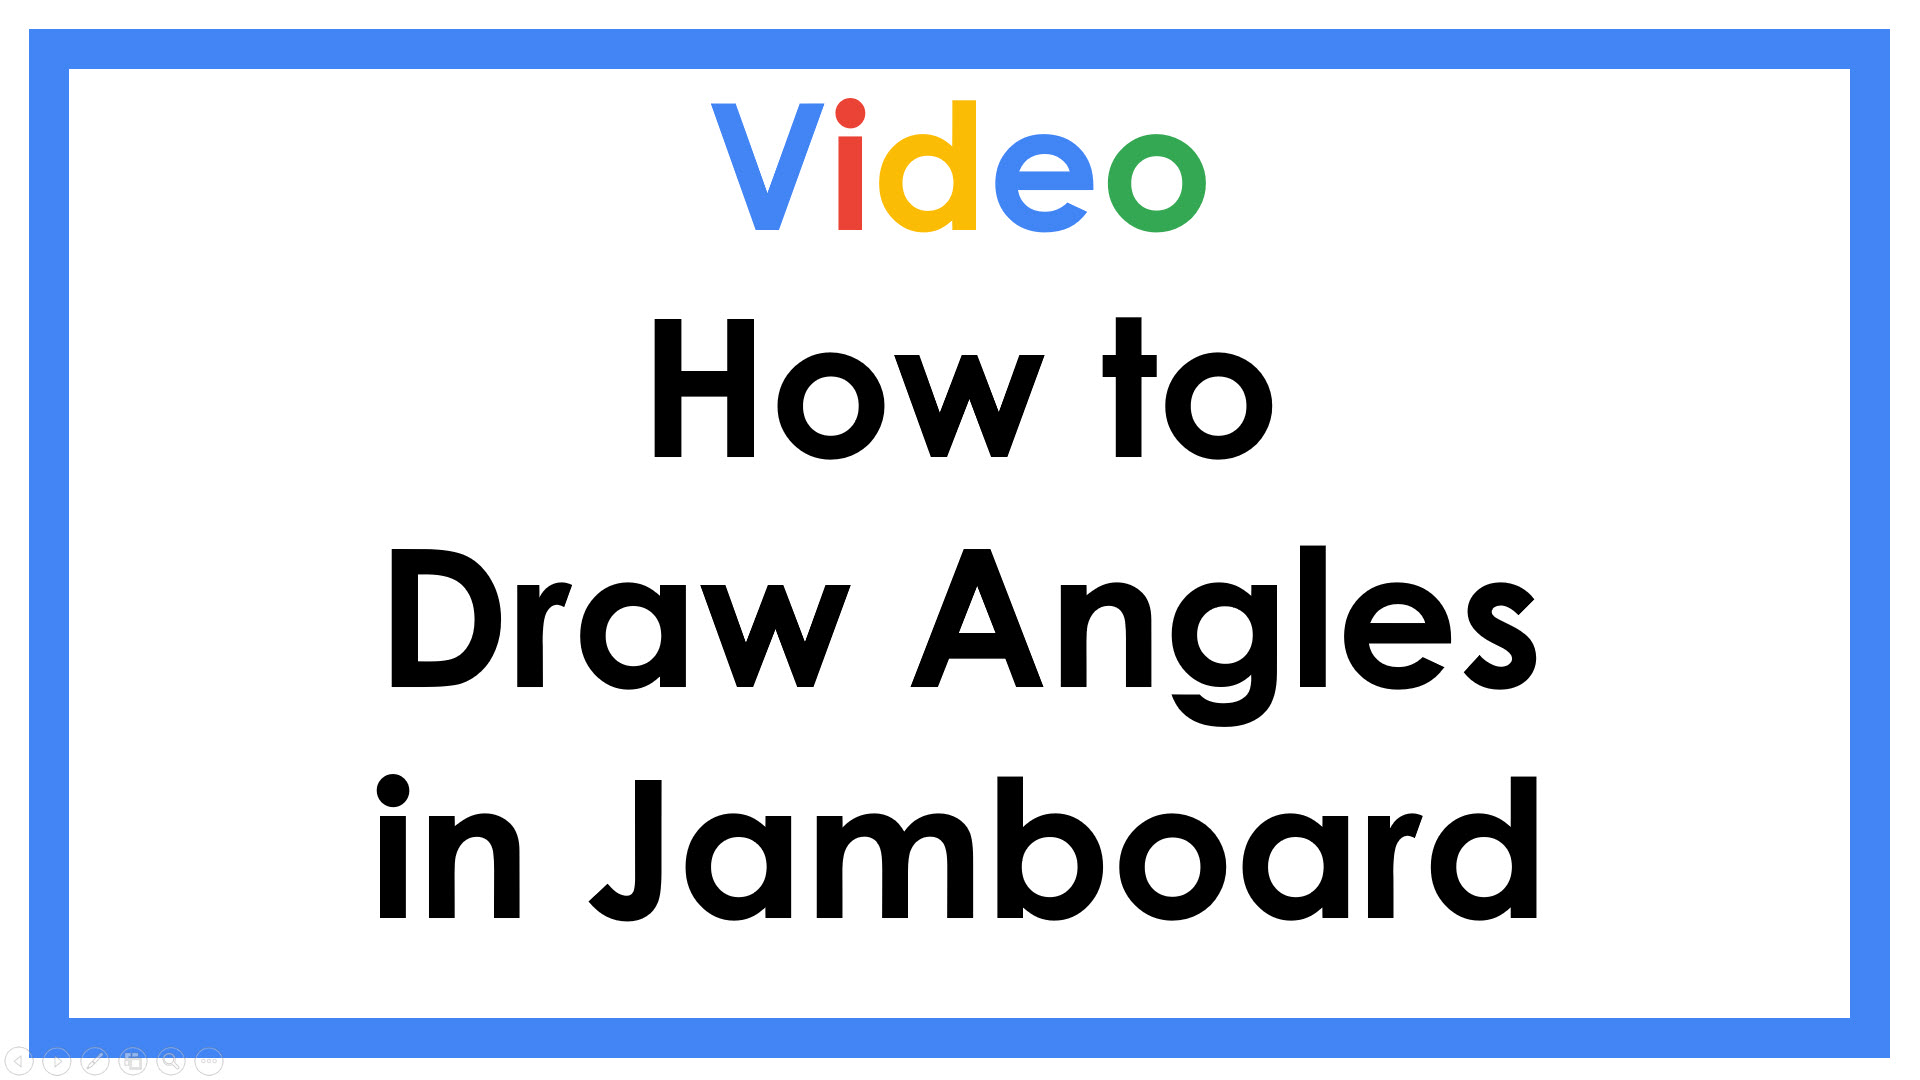 How to Draw Angles in Jamboard